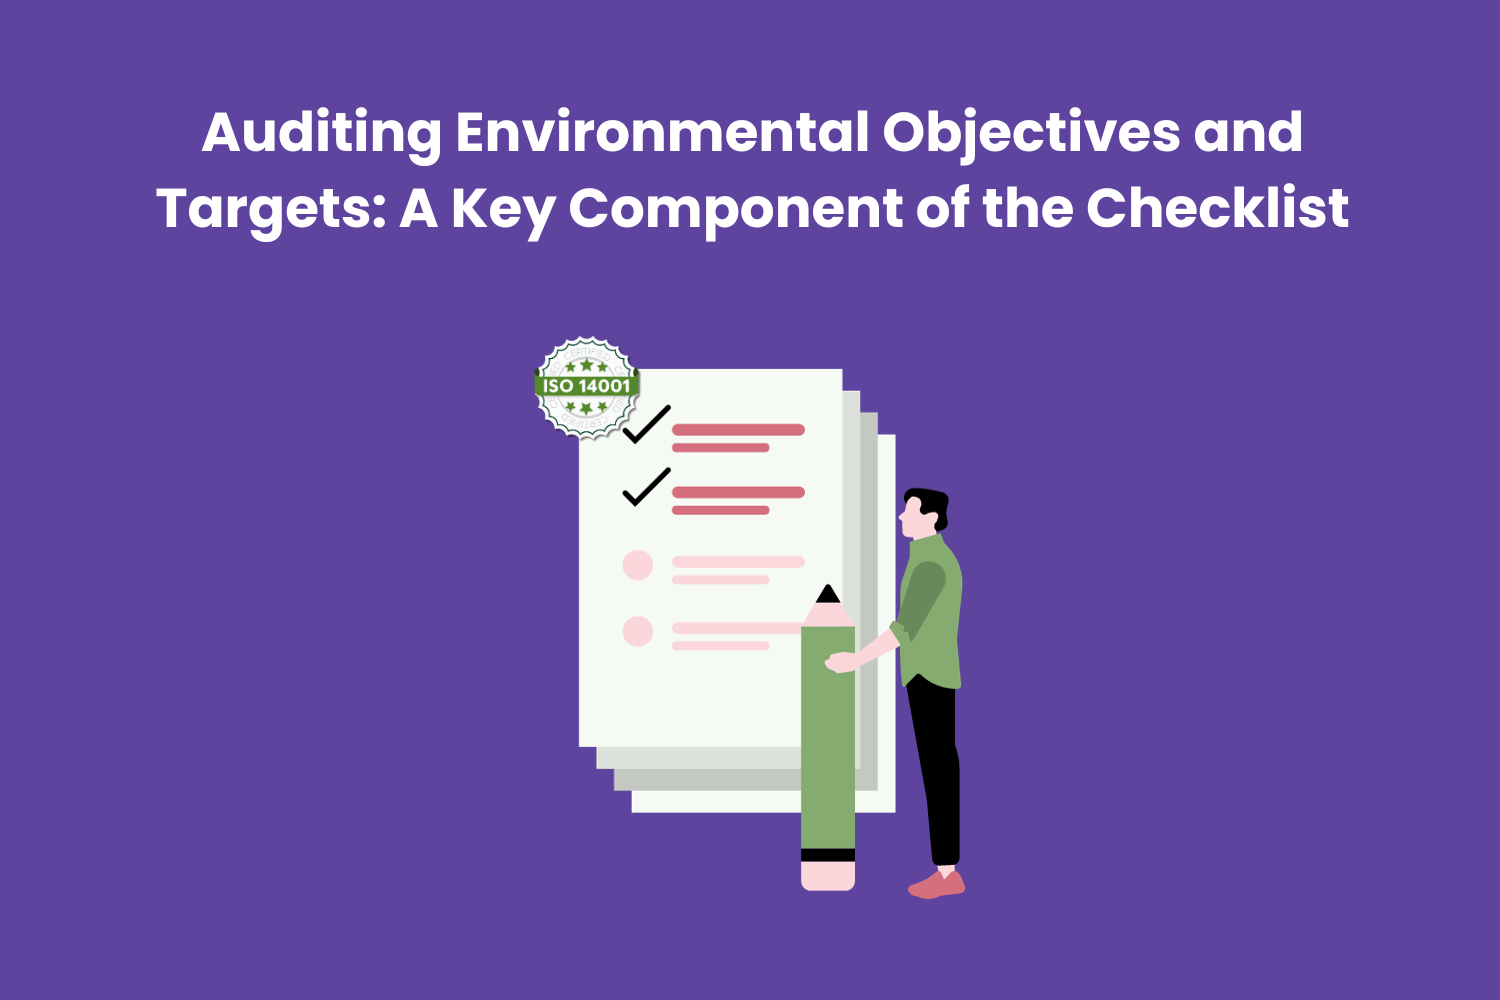 Auditing Environmental Objectives and Targets: A Key Component of the Checklist